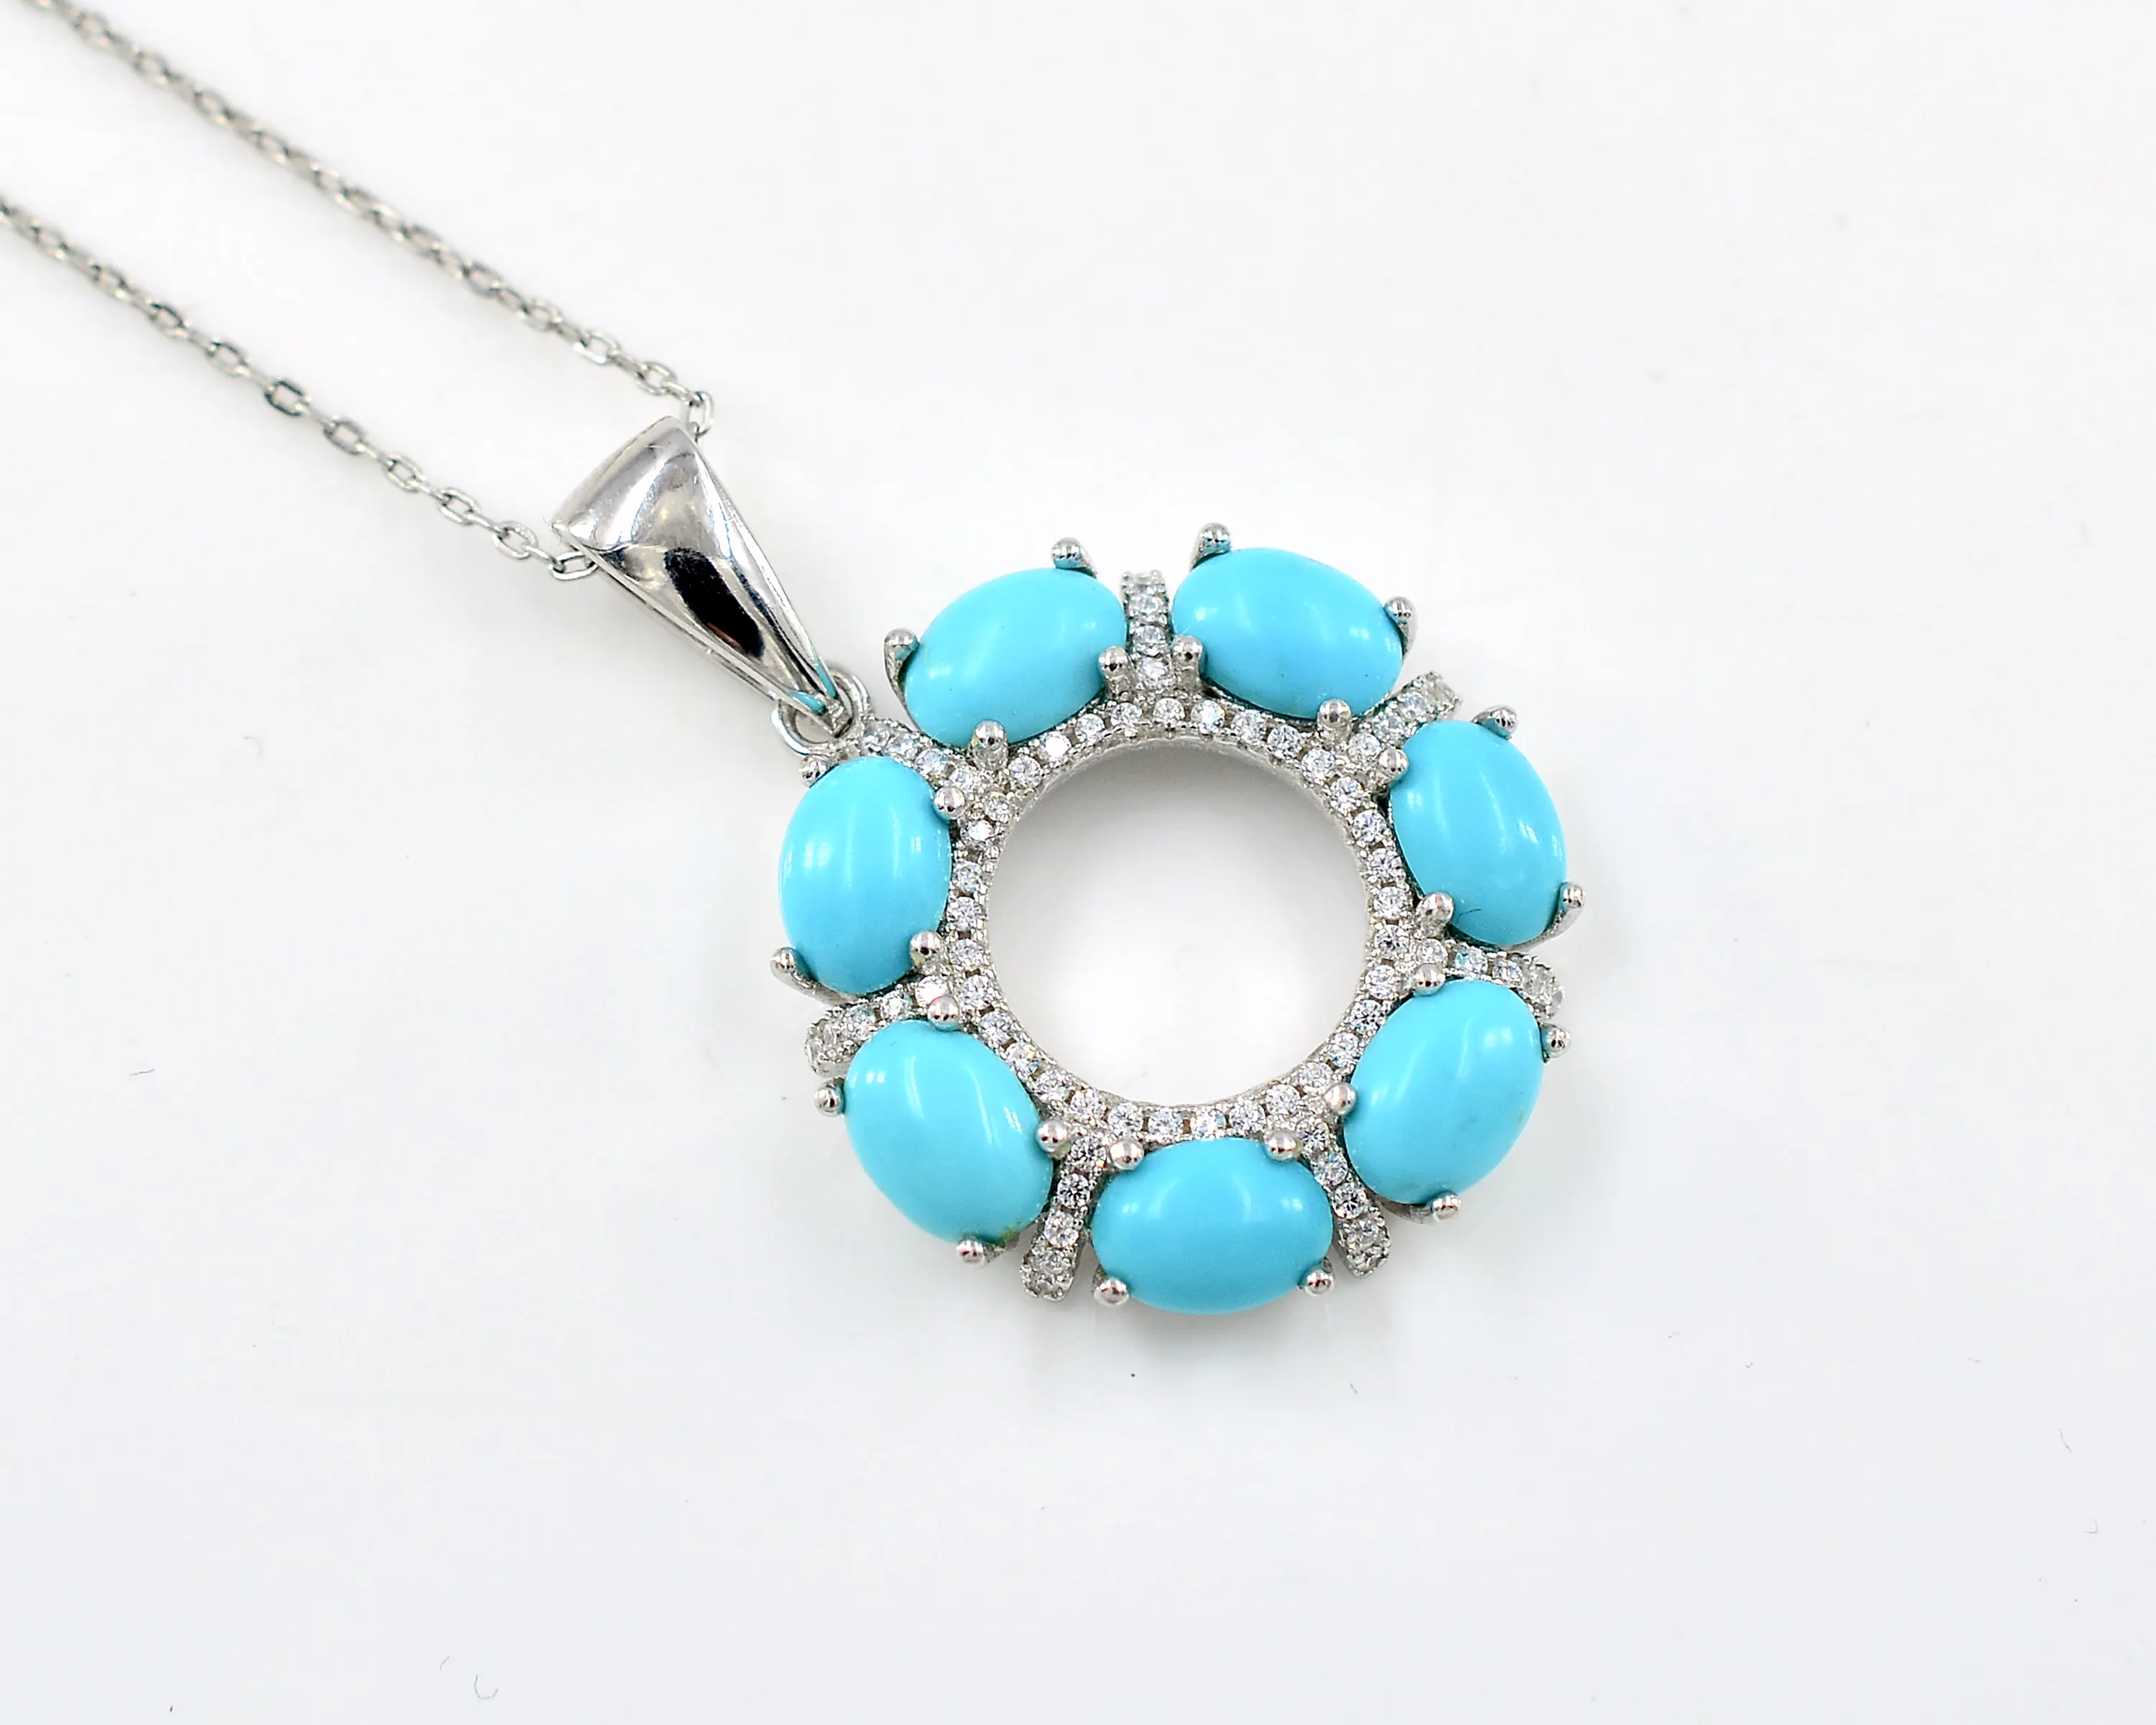 High Quality Natural Turquoise Cab Oval Shape Gemstone Pendant Sterling Silver Pendant Necklace Jewelry for Wholesaler